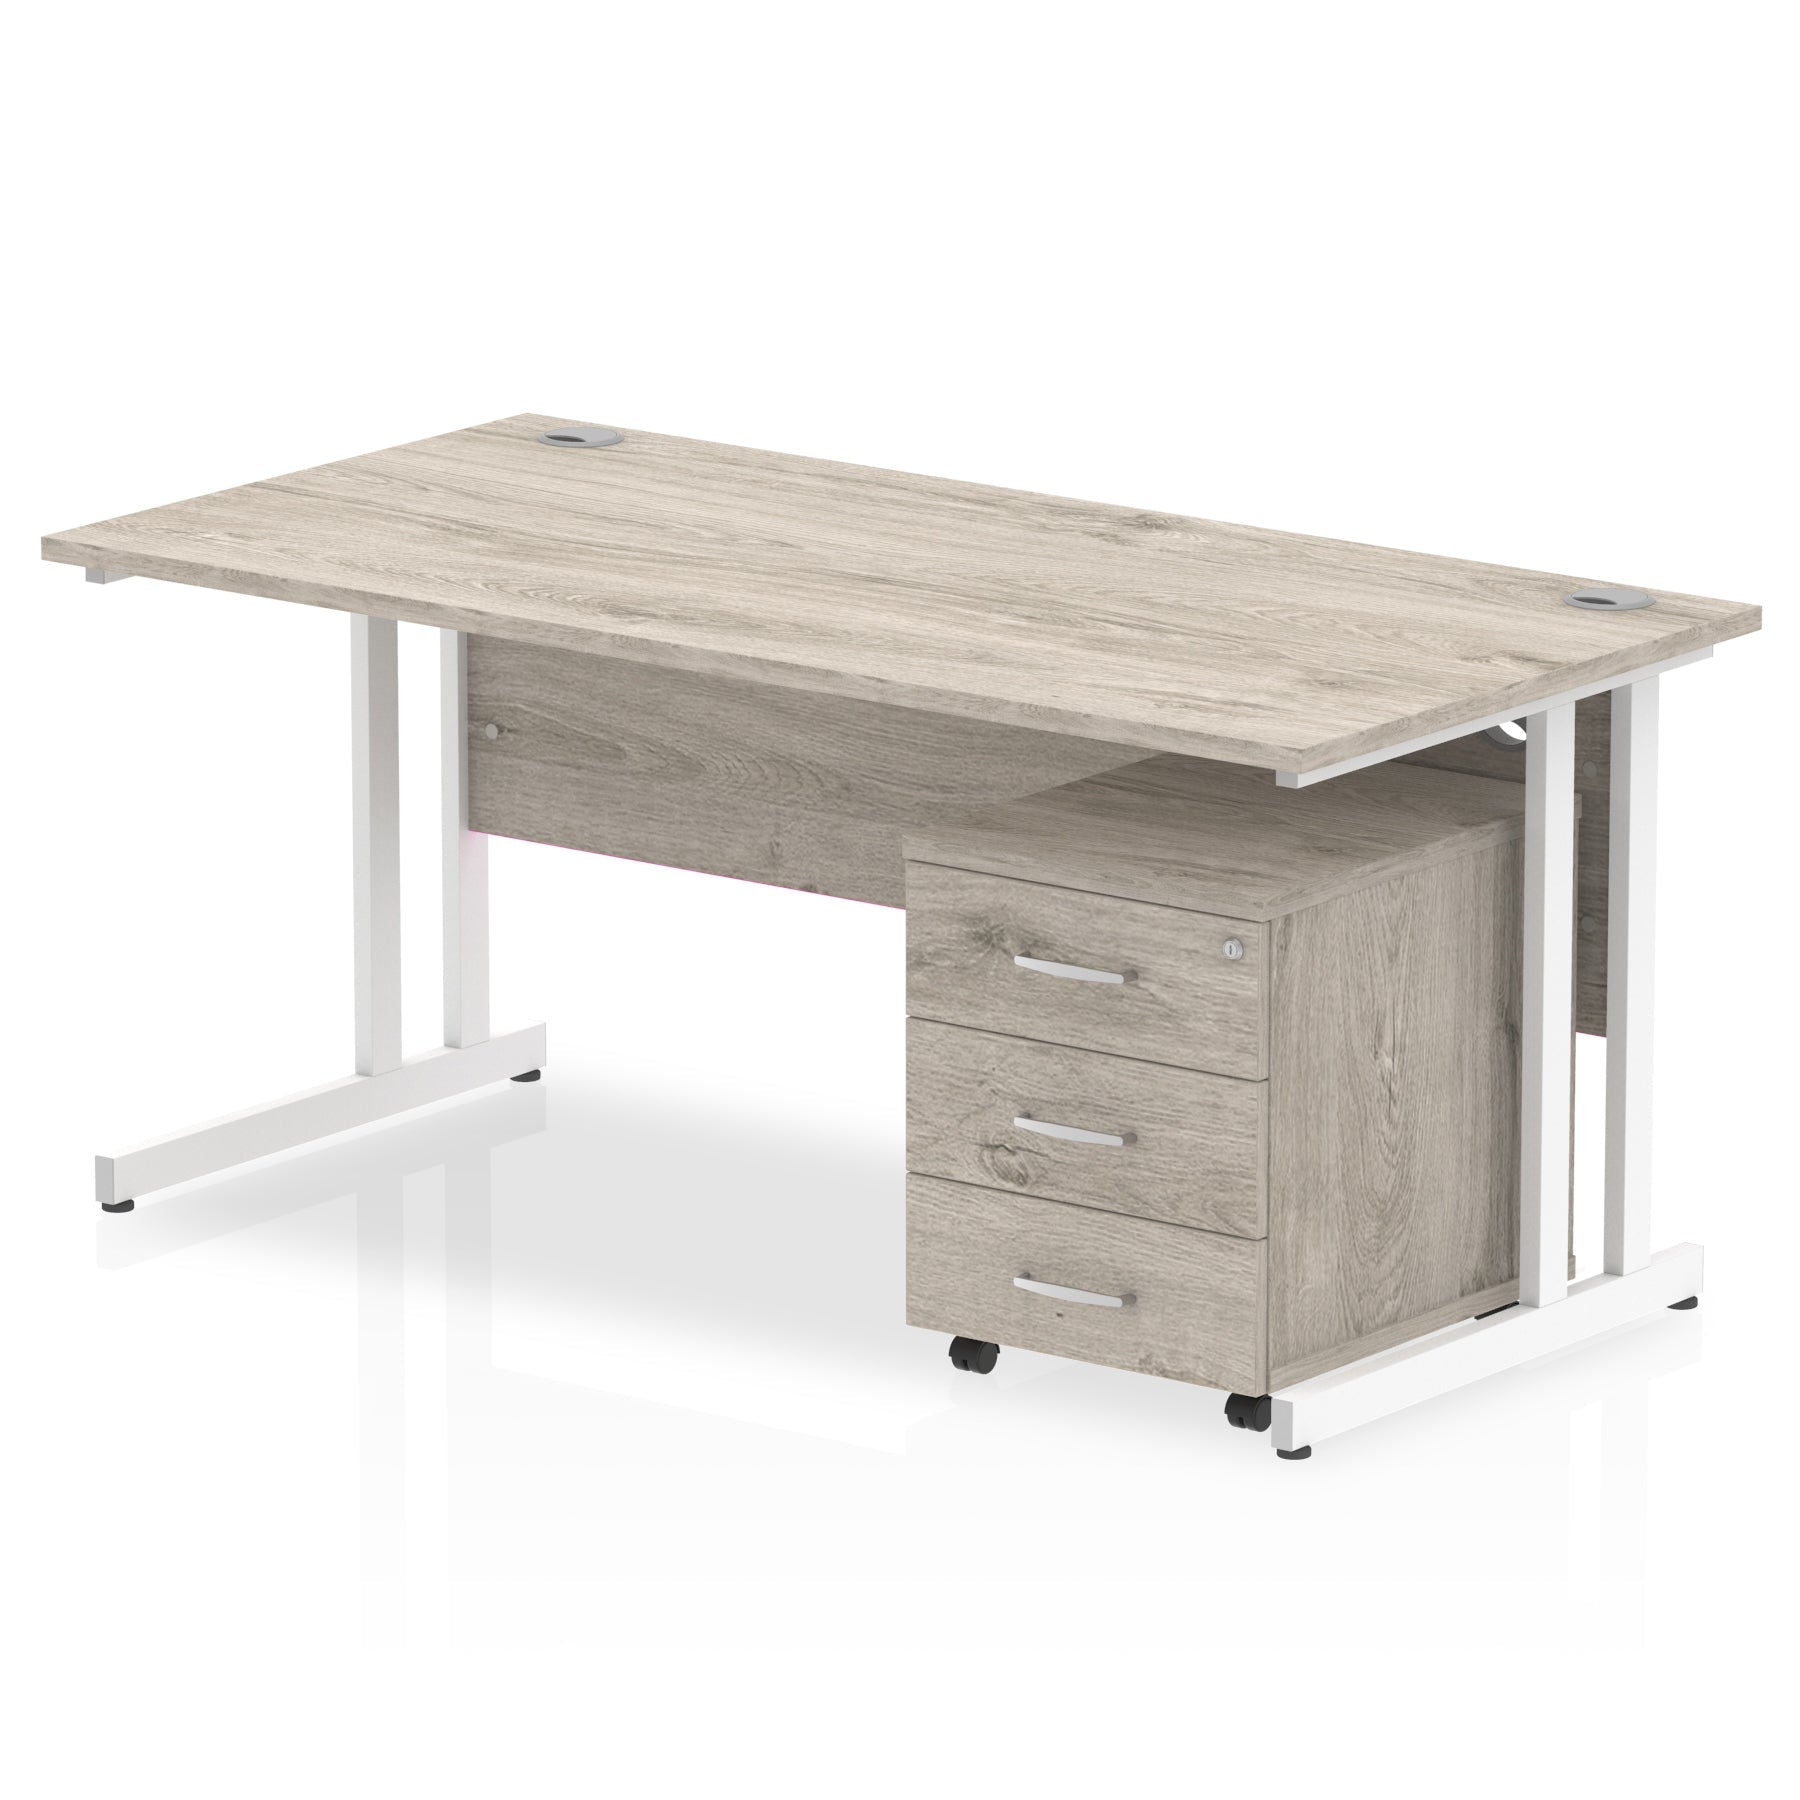 Impulse 1600mm Cantilever Straight Desk w/ Mobile Pedestal - MFC Rectangular, Self-Assembly, 5-Year Guarantee, Silver/White Frame, Lockable Drawers